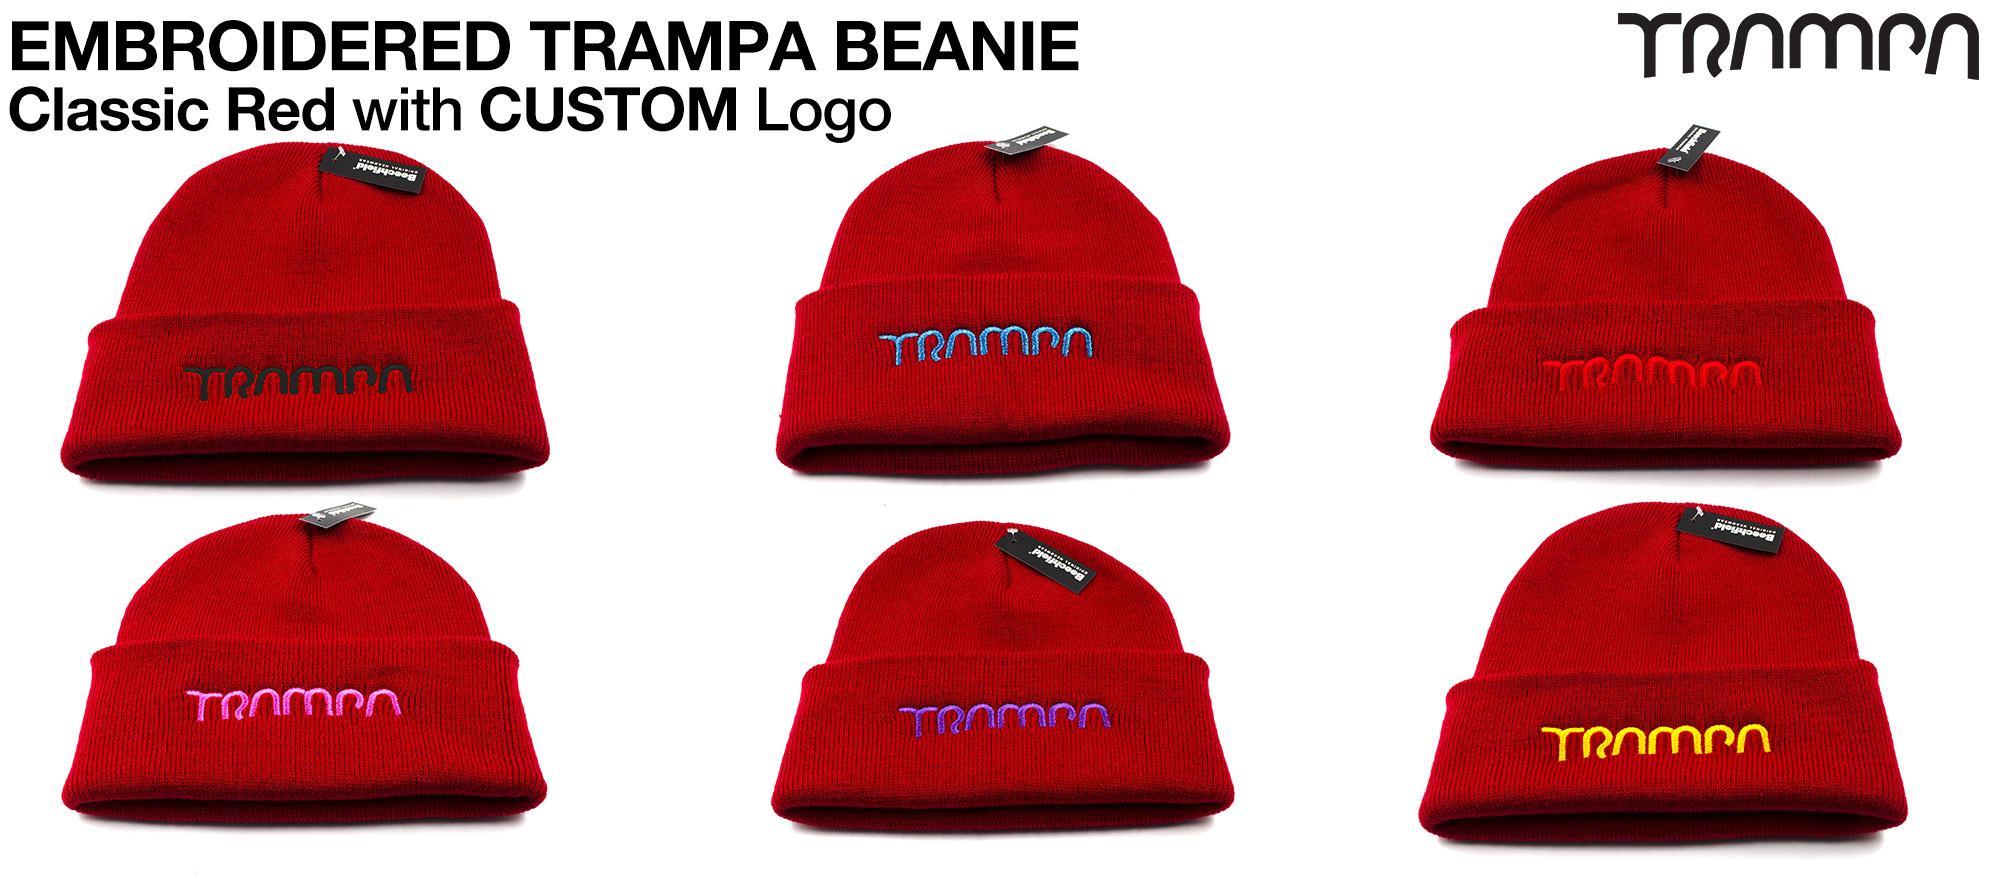 Classic RED Beanie with EMBROIDERED TRAMPA logo (£12.50) (out of stock)